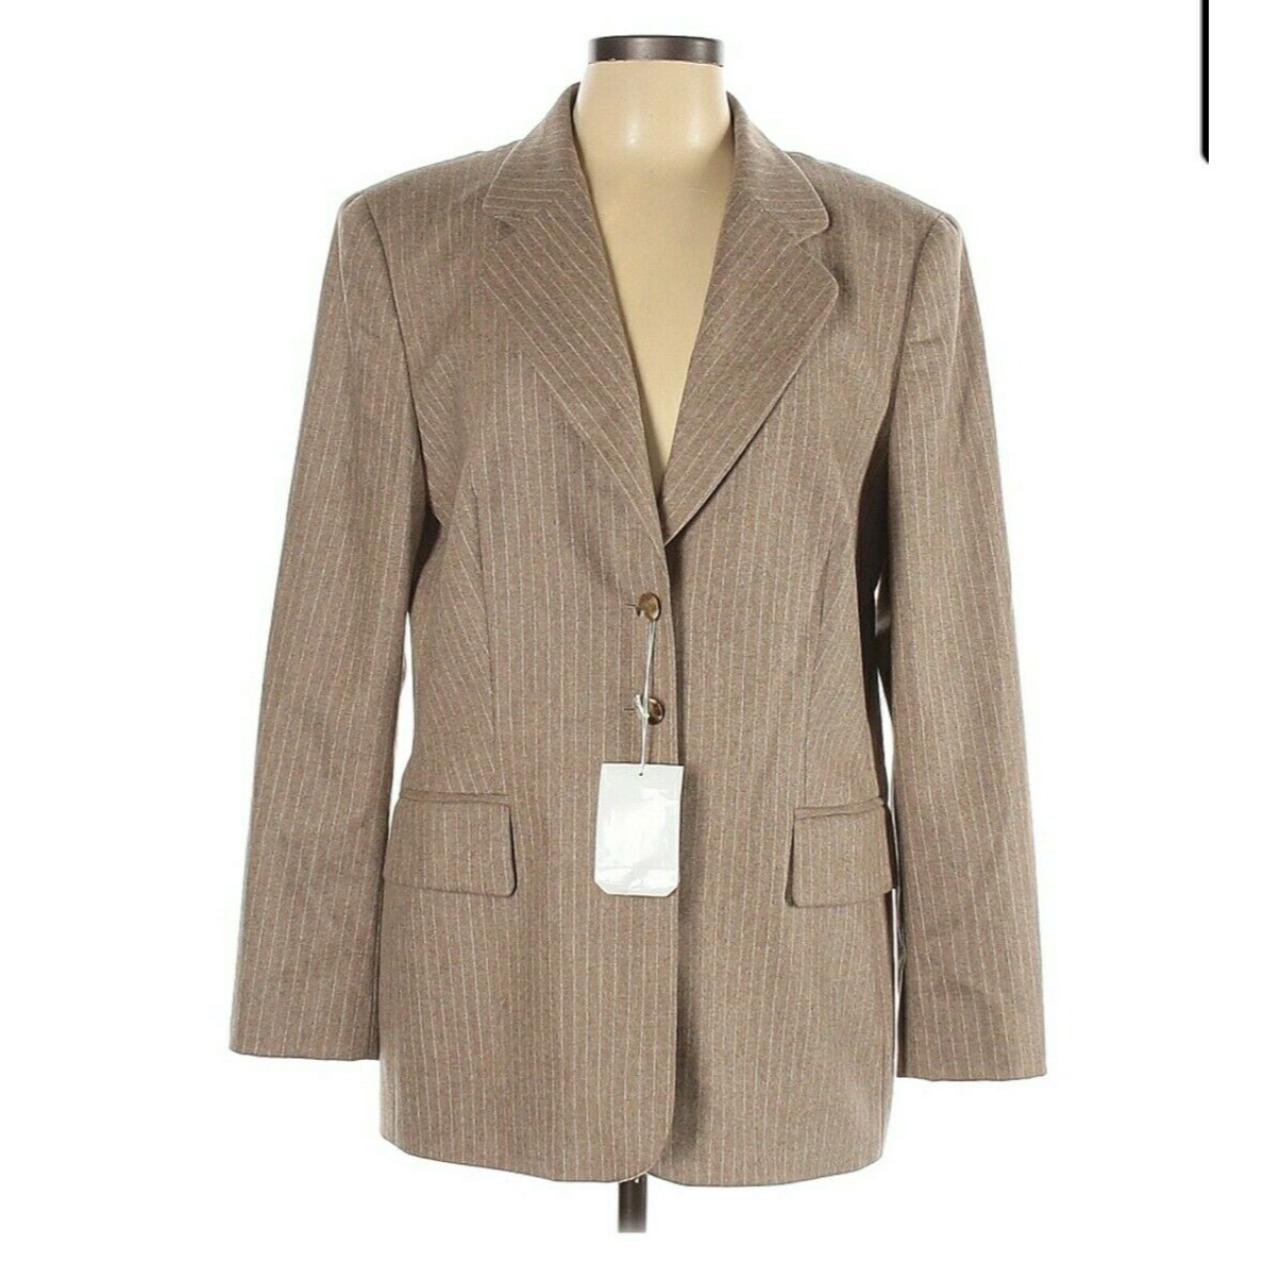 Women's Brown and Tan Suit (2)